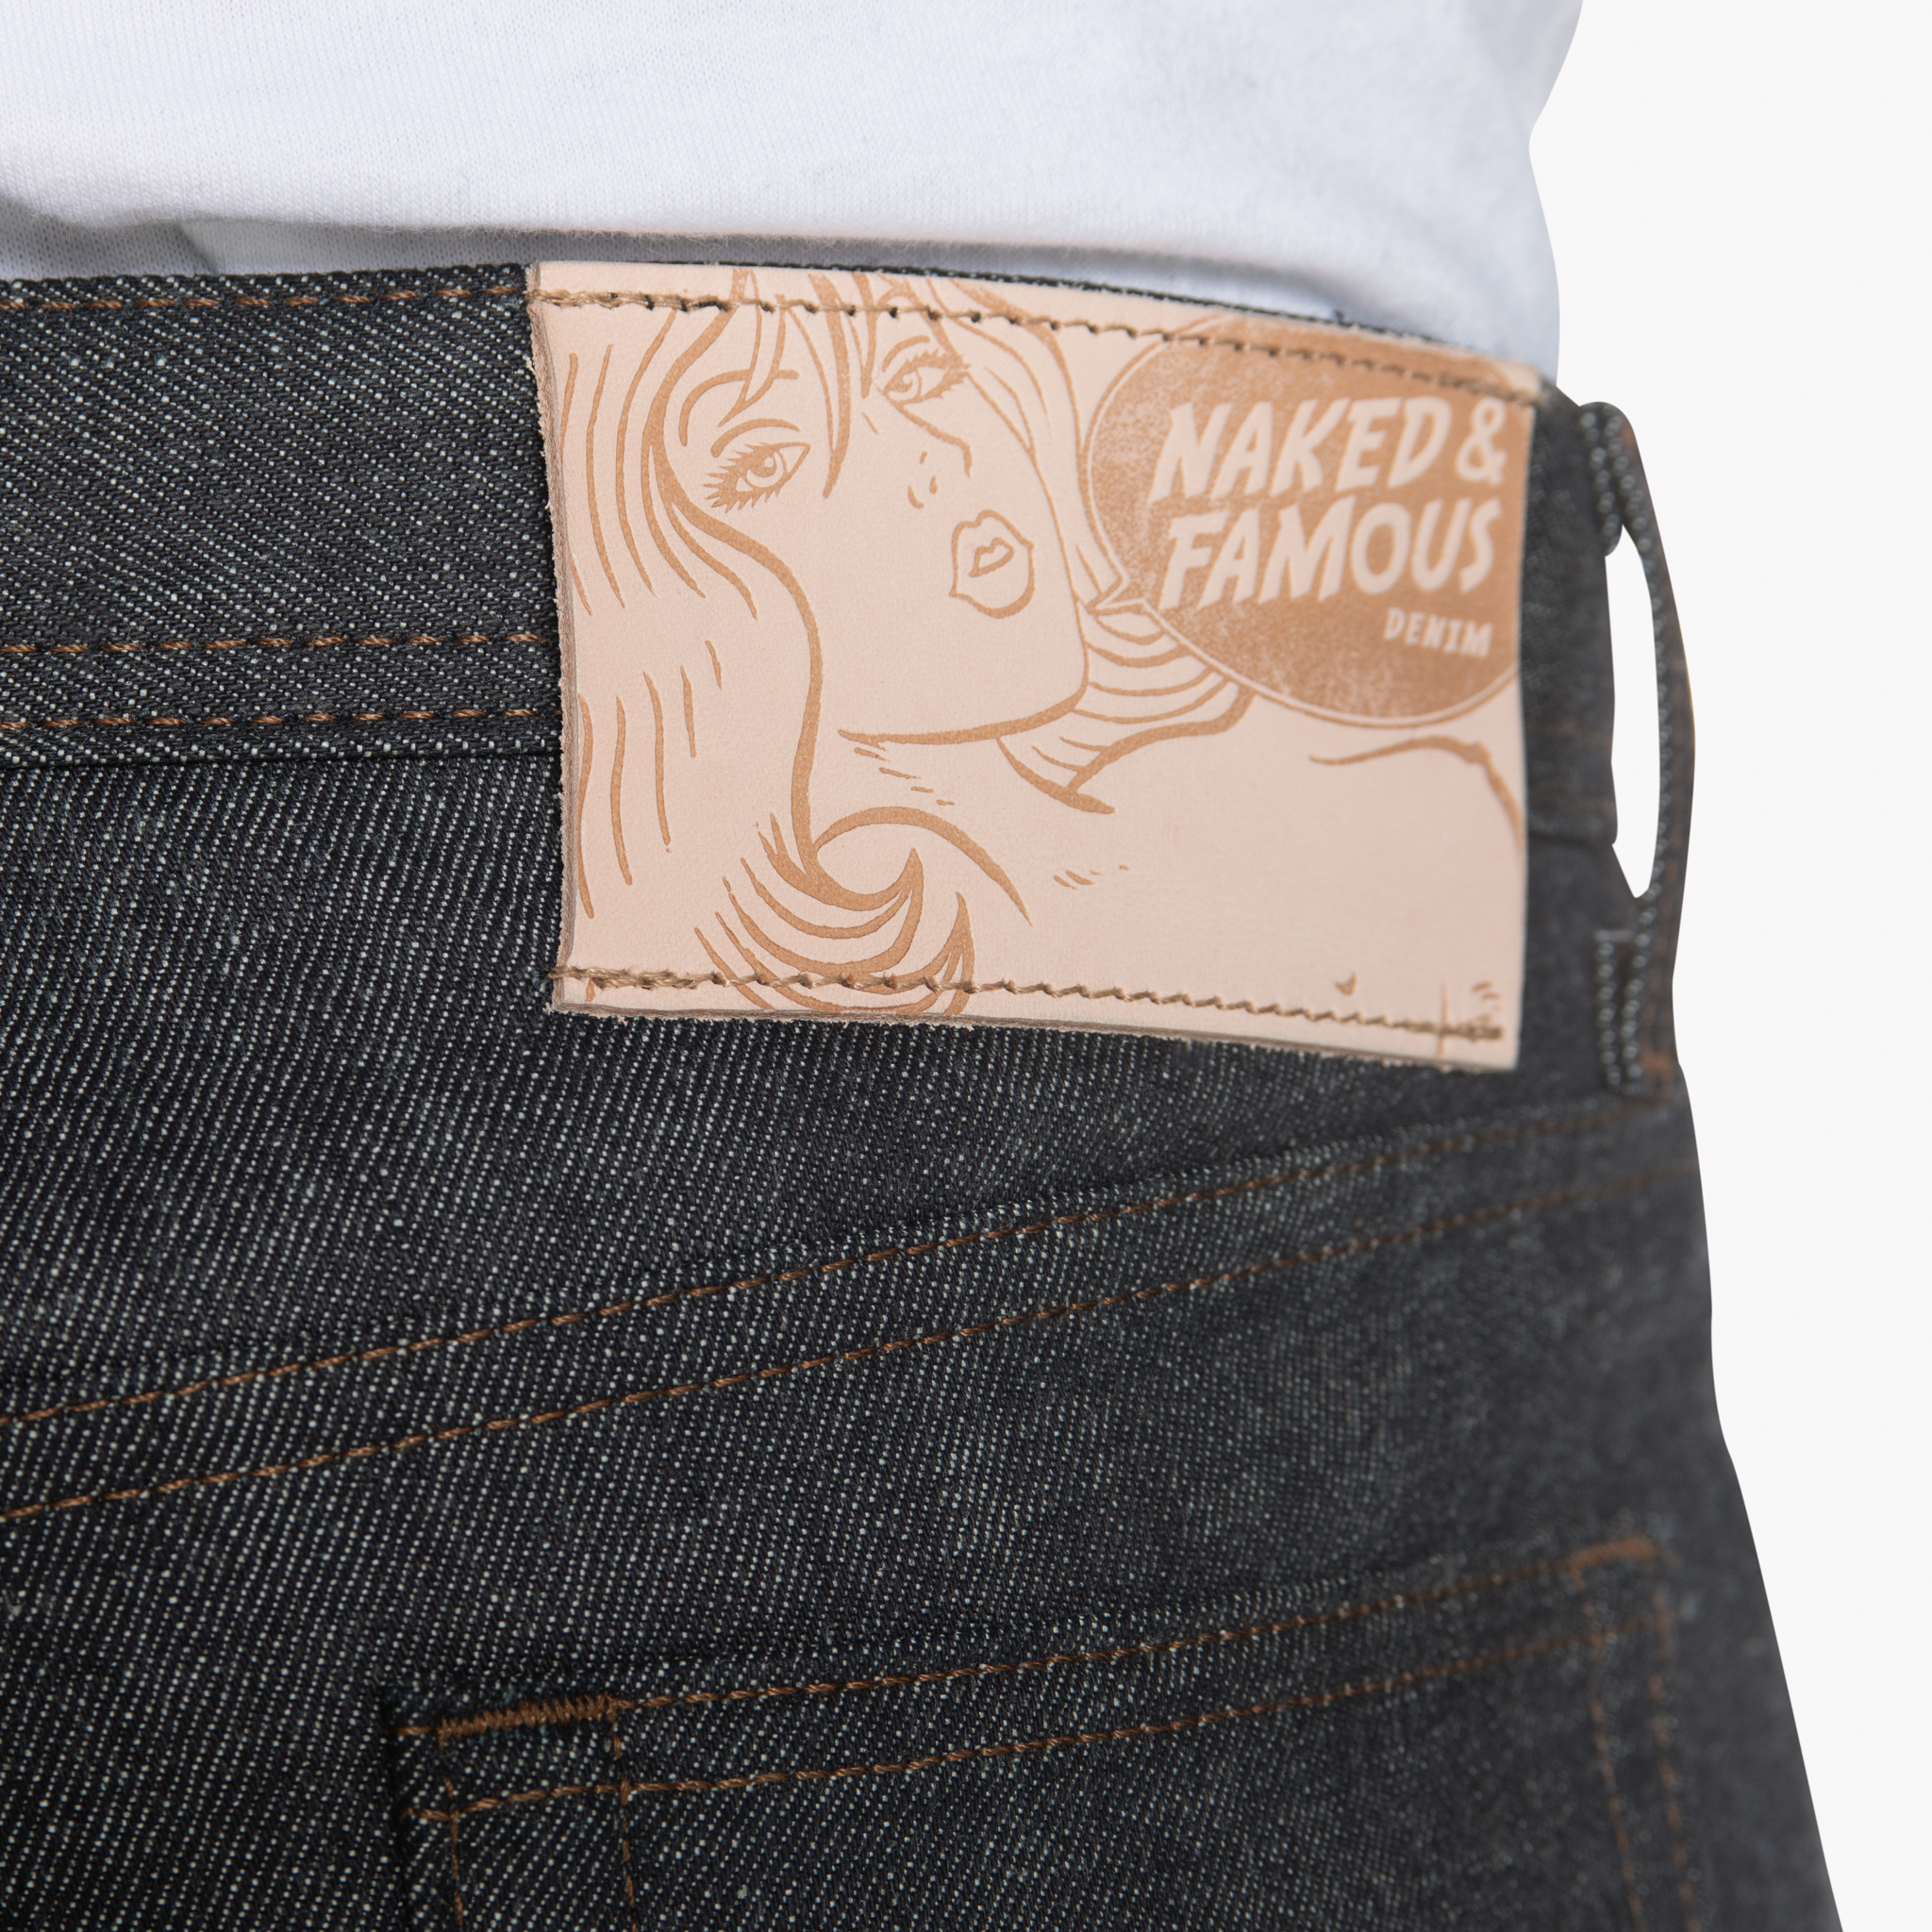  Scratch-n-Sniff - Hiba Cypress  jeans - leather patch 